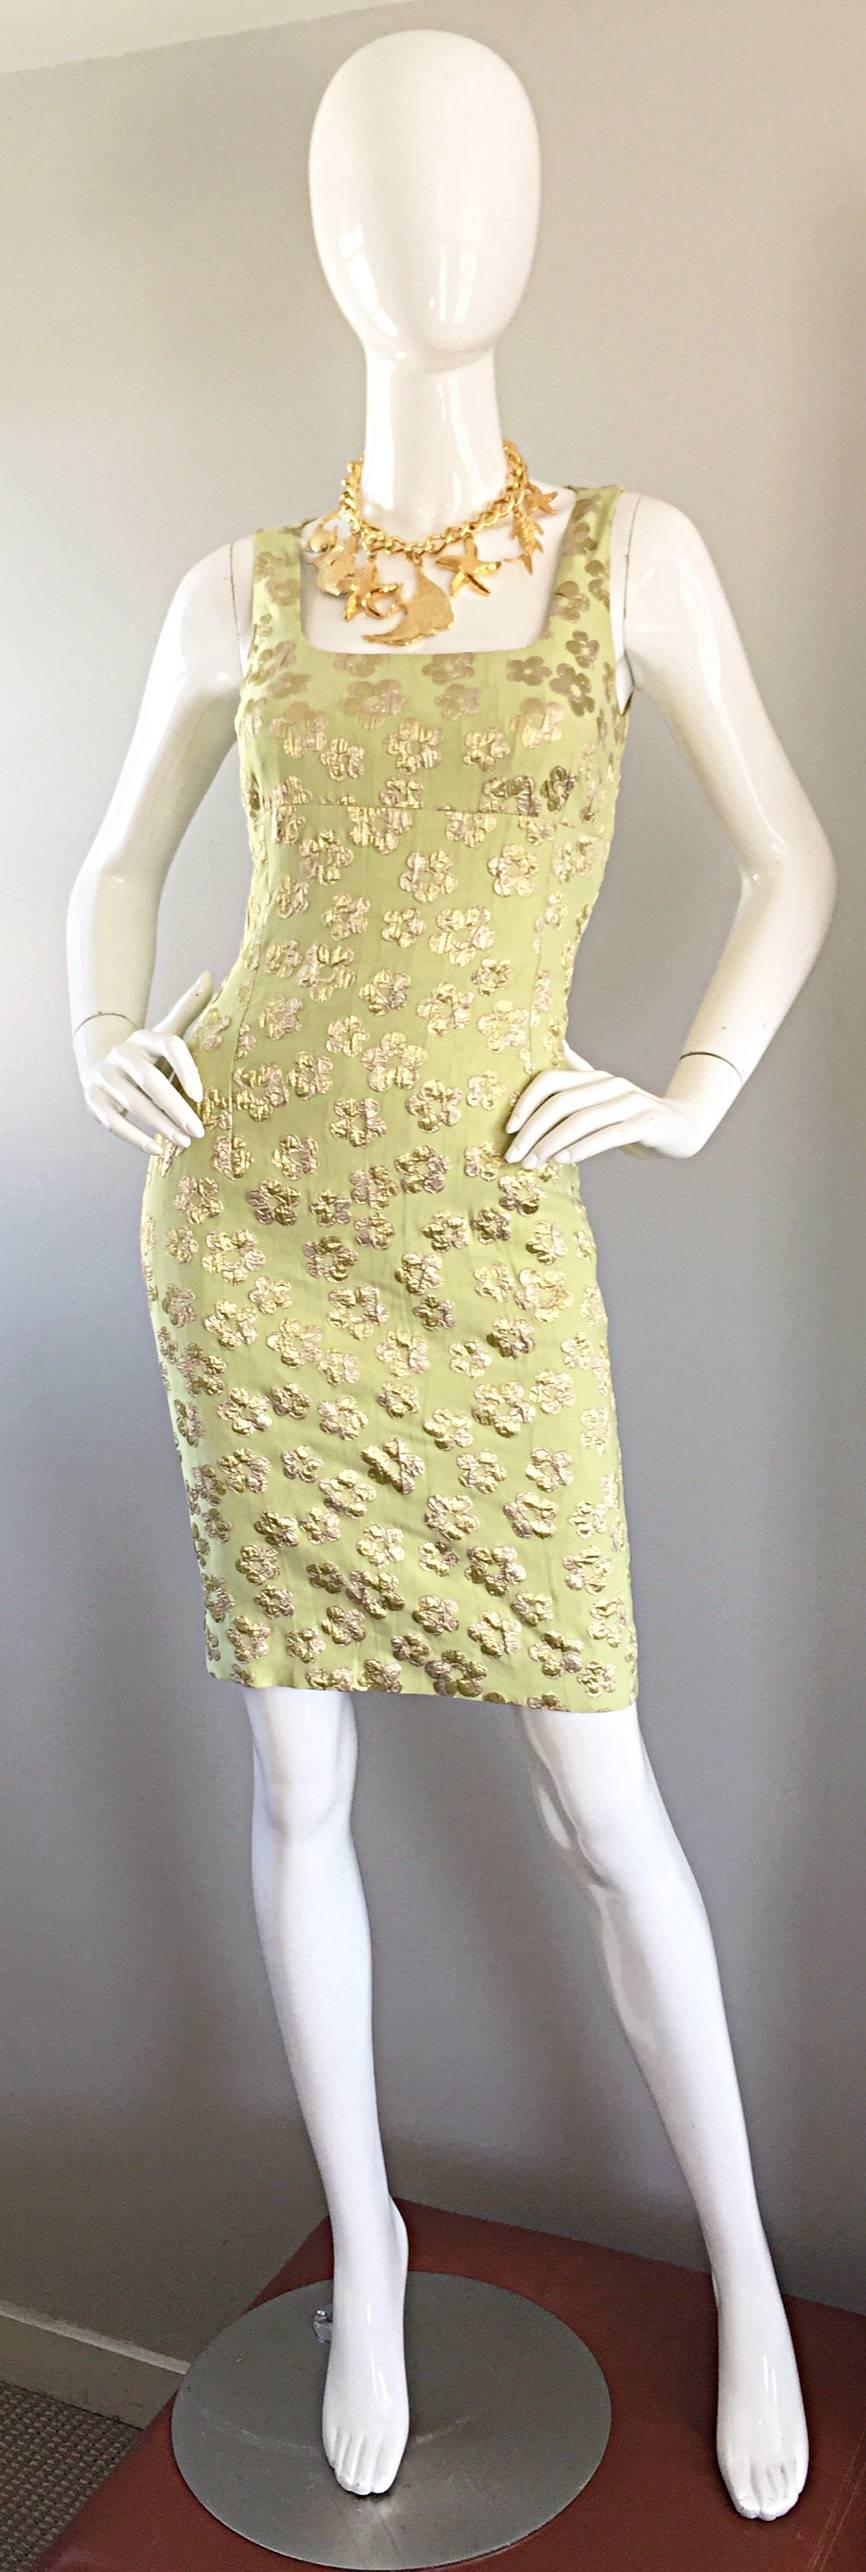 Beautiful brand new MICHAEL KORS COLLECTION (Made in Italy) mint green silk plisse bodycon dress! Features allover metallic gold and white gold flowers throughout the front and back. An ode to the 1990s with the fit, with a chic 1960s flower power